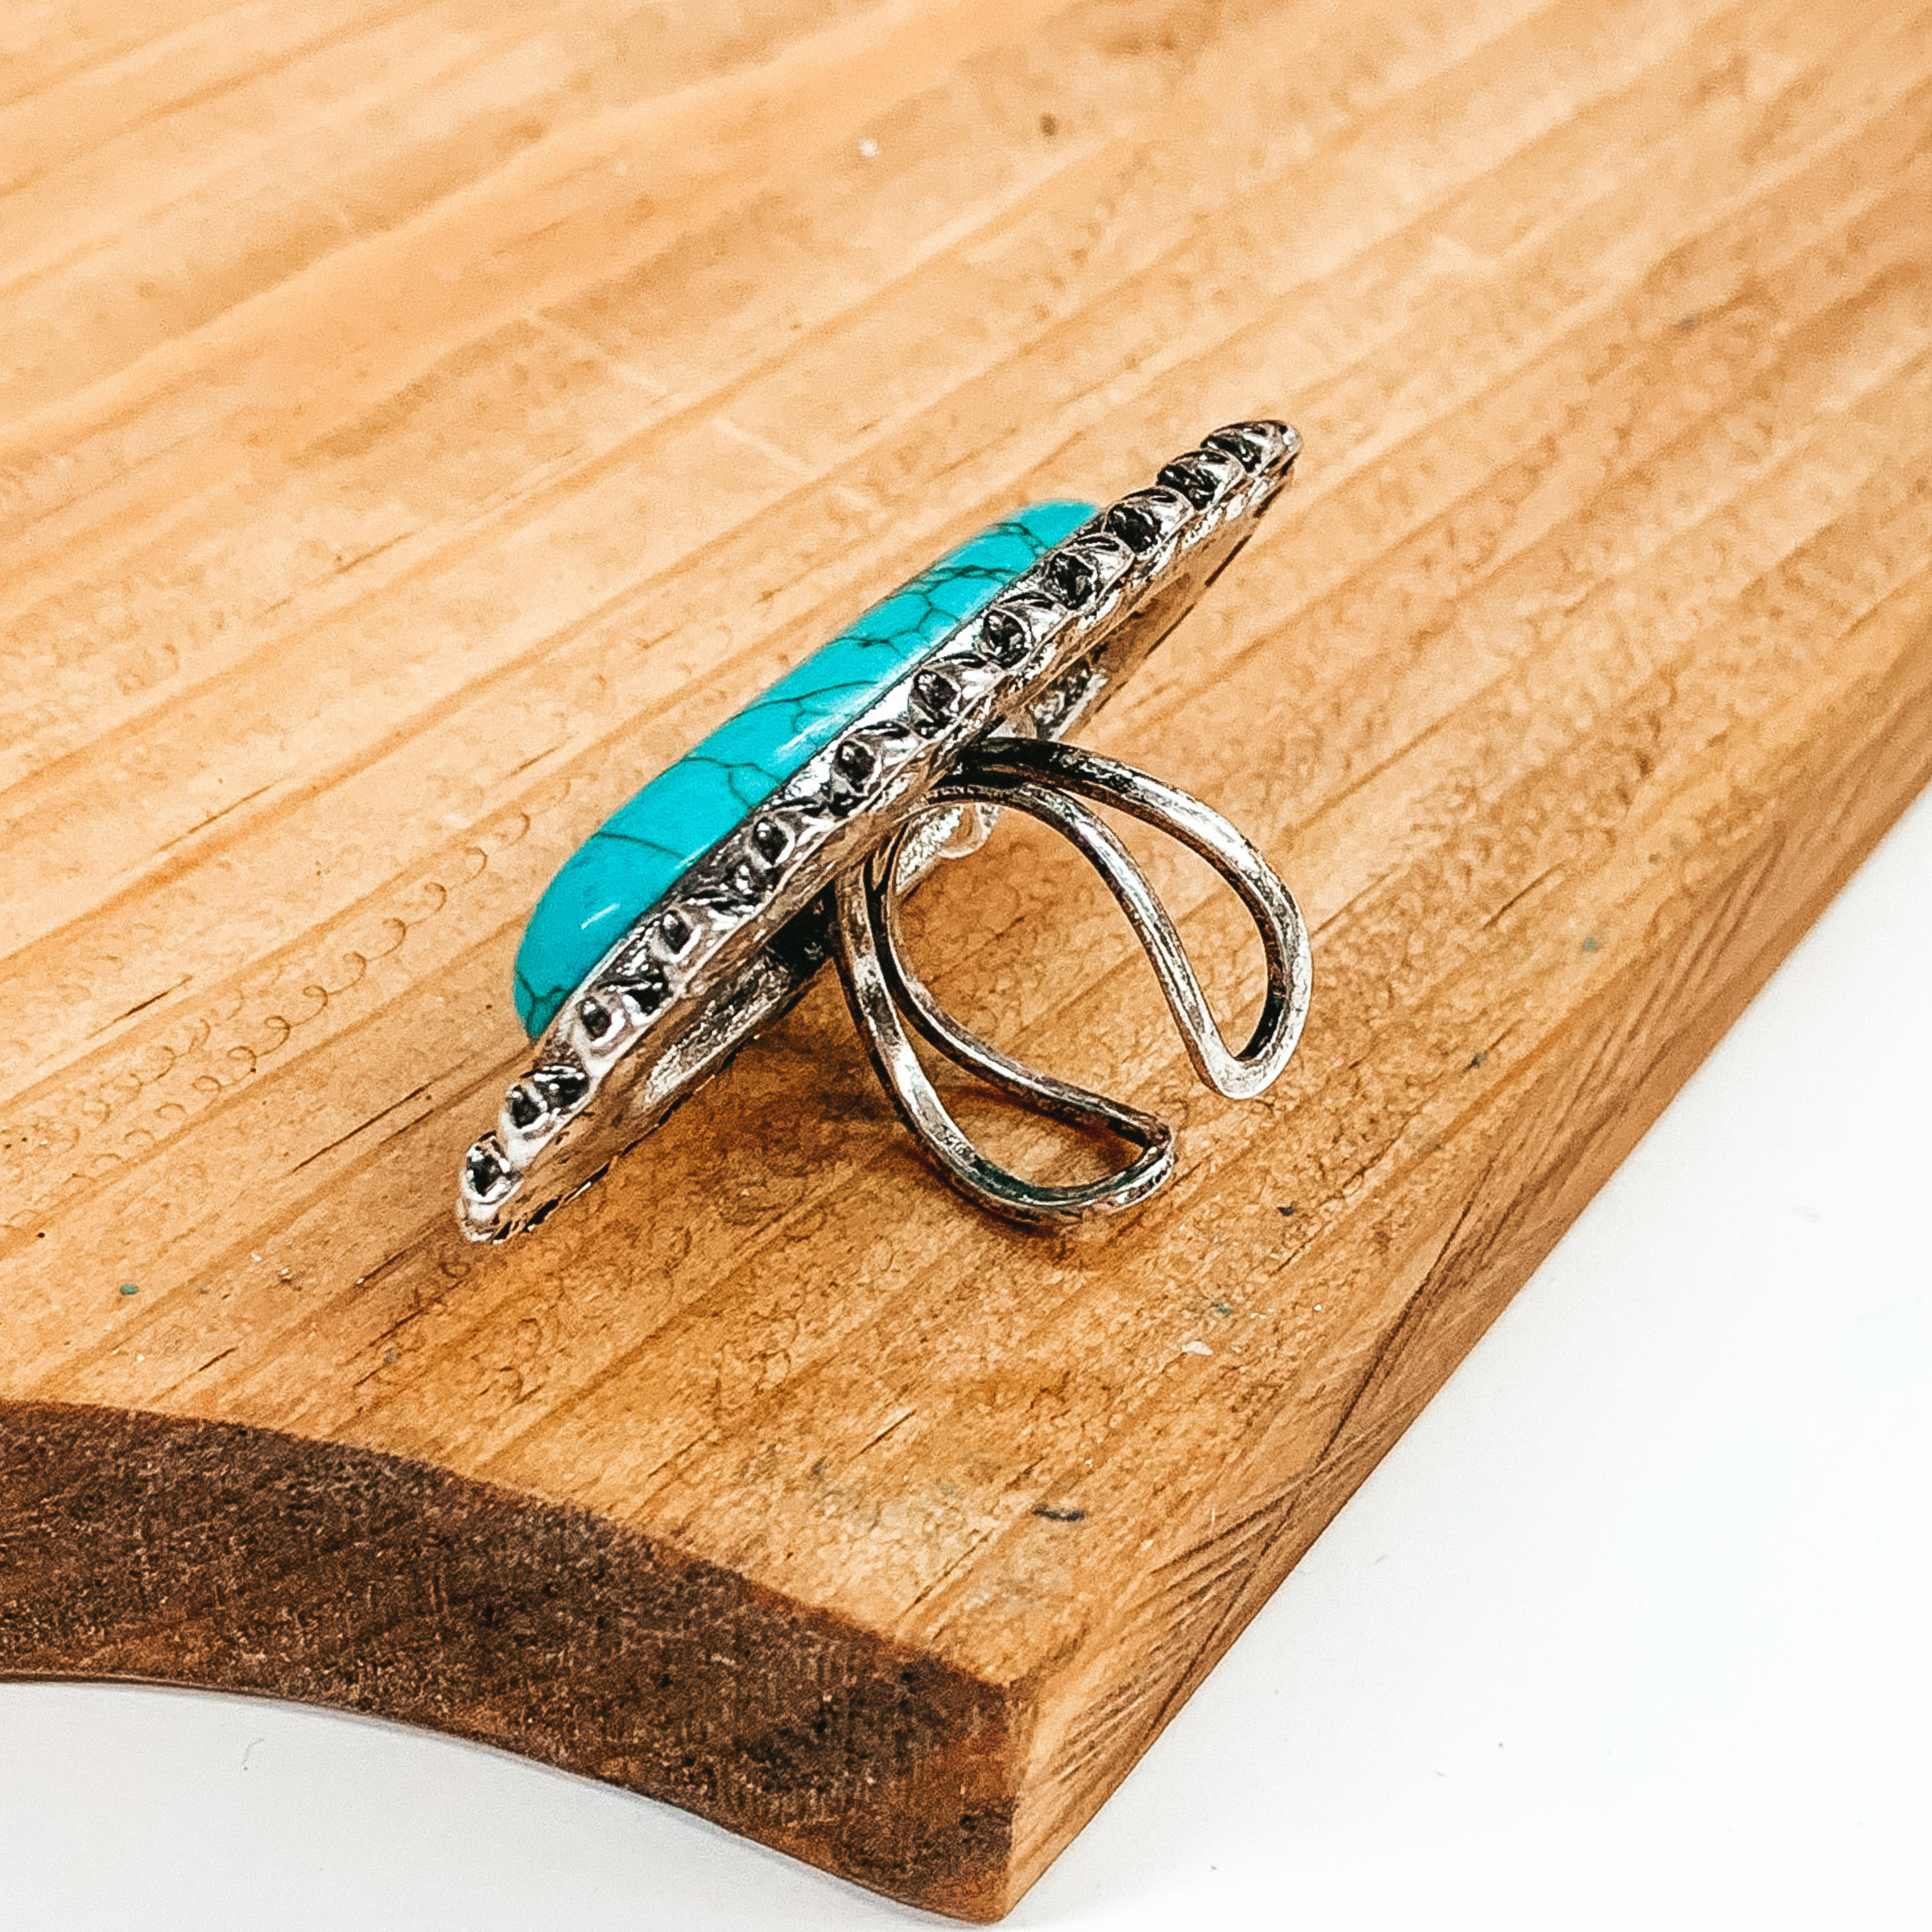 Oversized Western Oval Stone Silver Tone Cuff Ring in Turquoise - Giddy Up Glamour Boutique